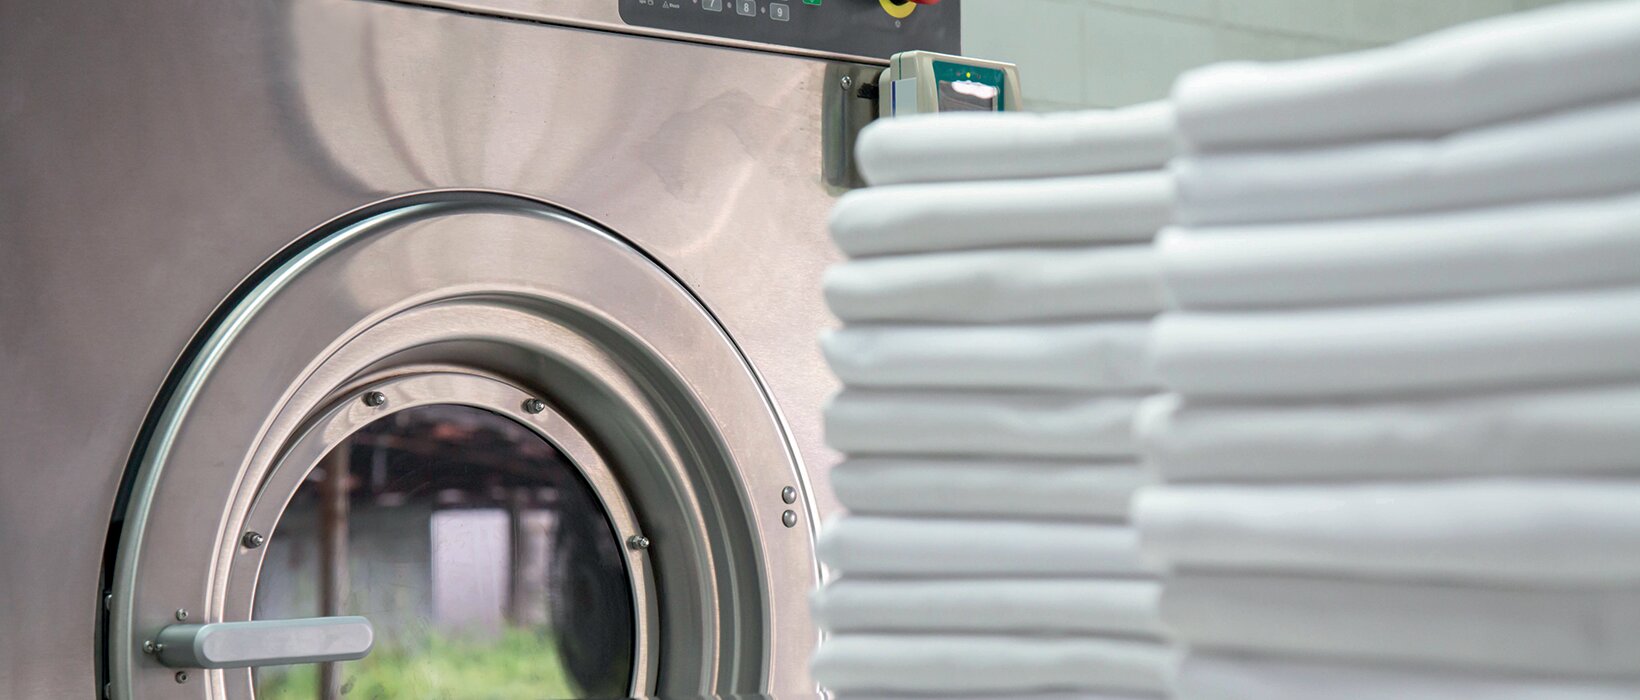 Cheat sheets: how to make your laundry operation clean and serene